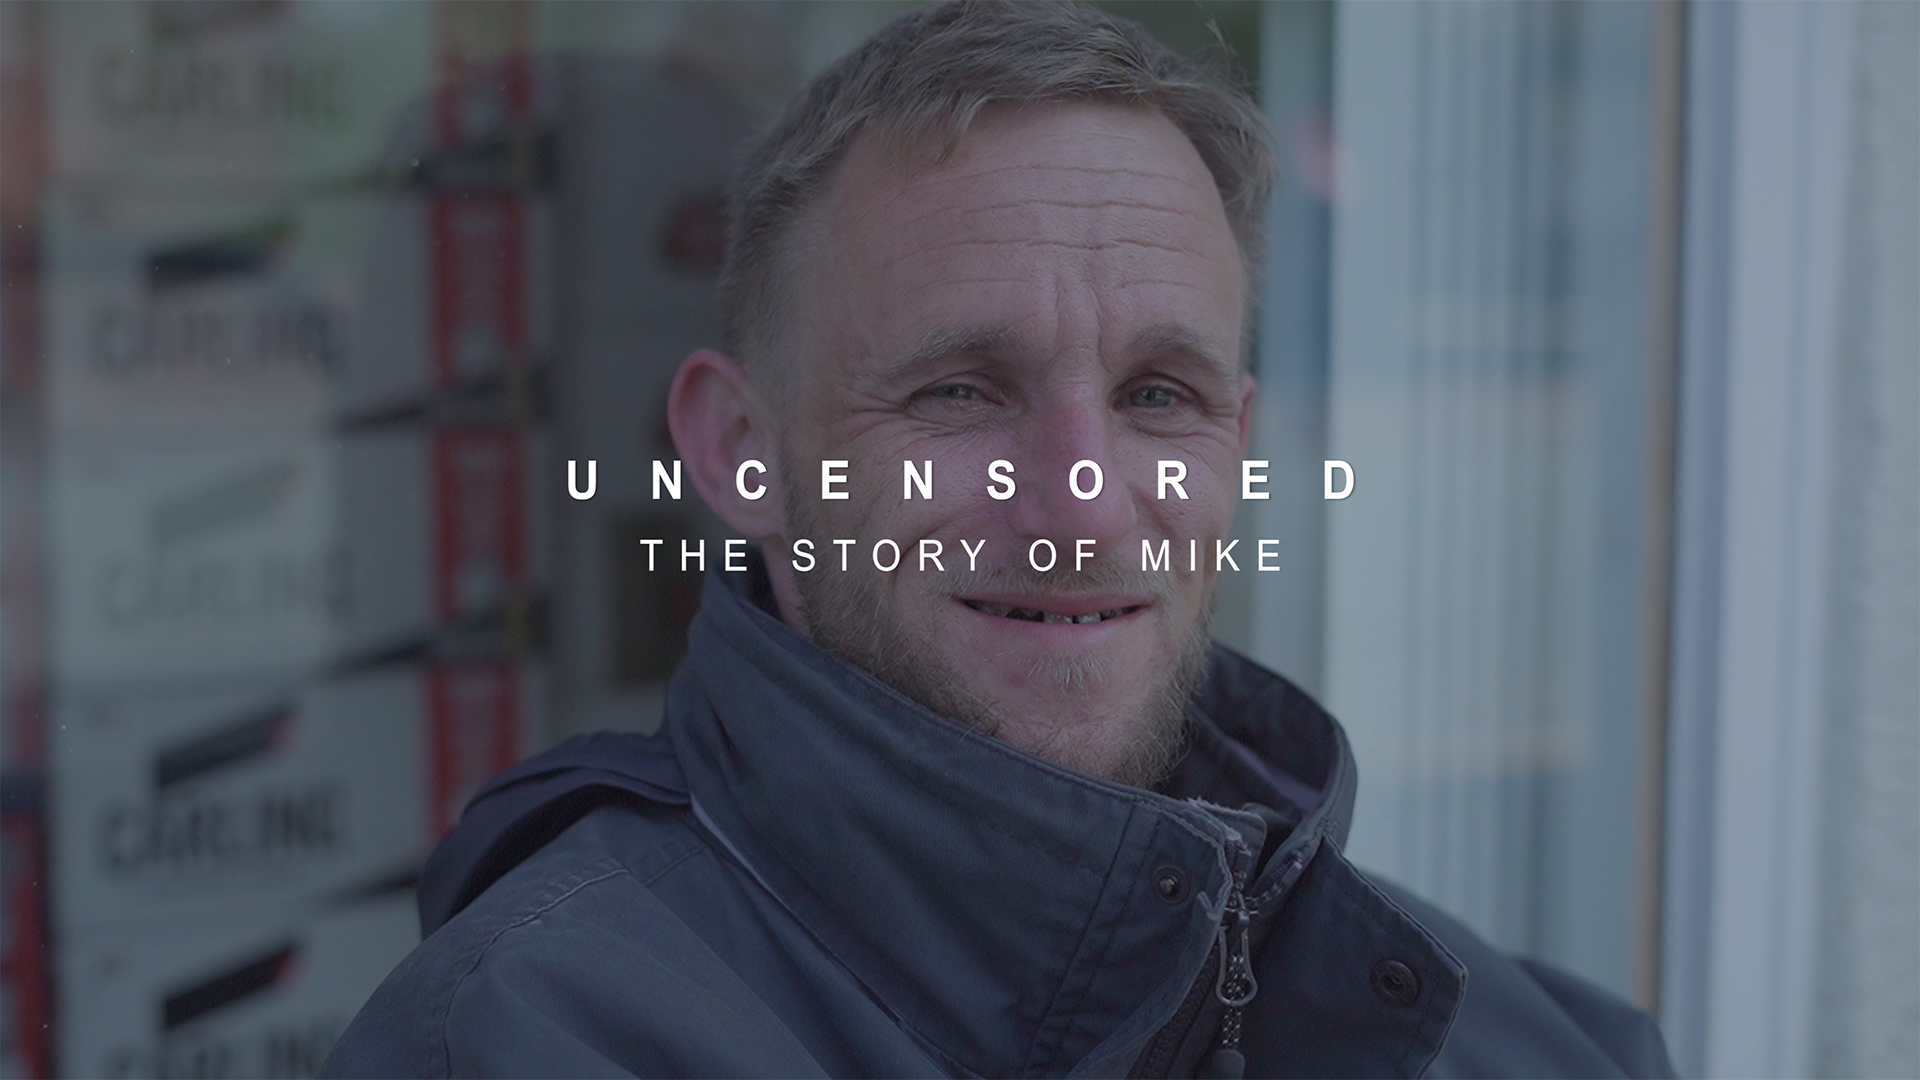 Homelessness In Manchester: The Story Of Mike [Uncensored Documentary]